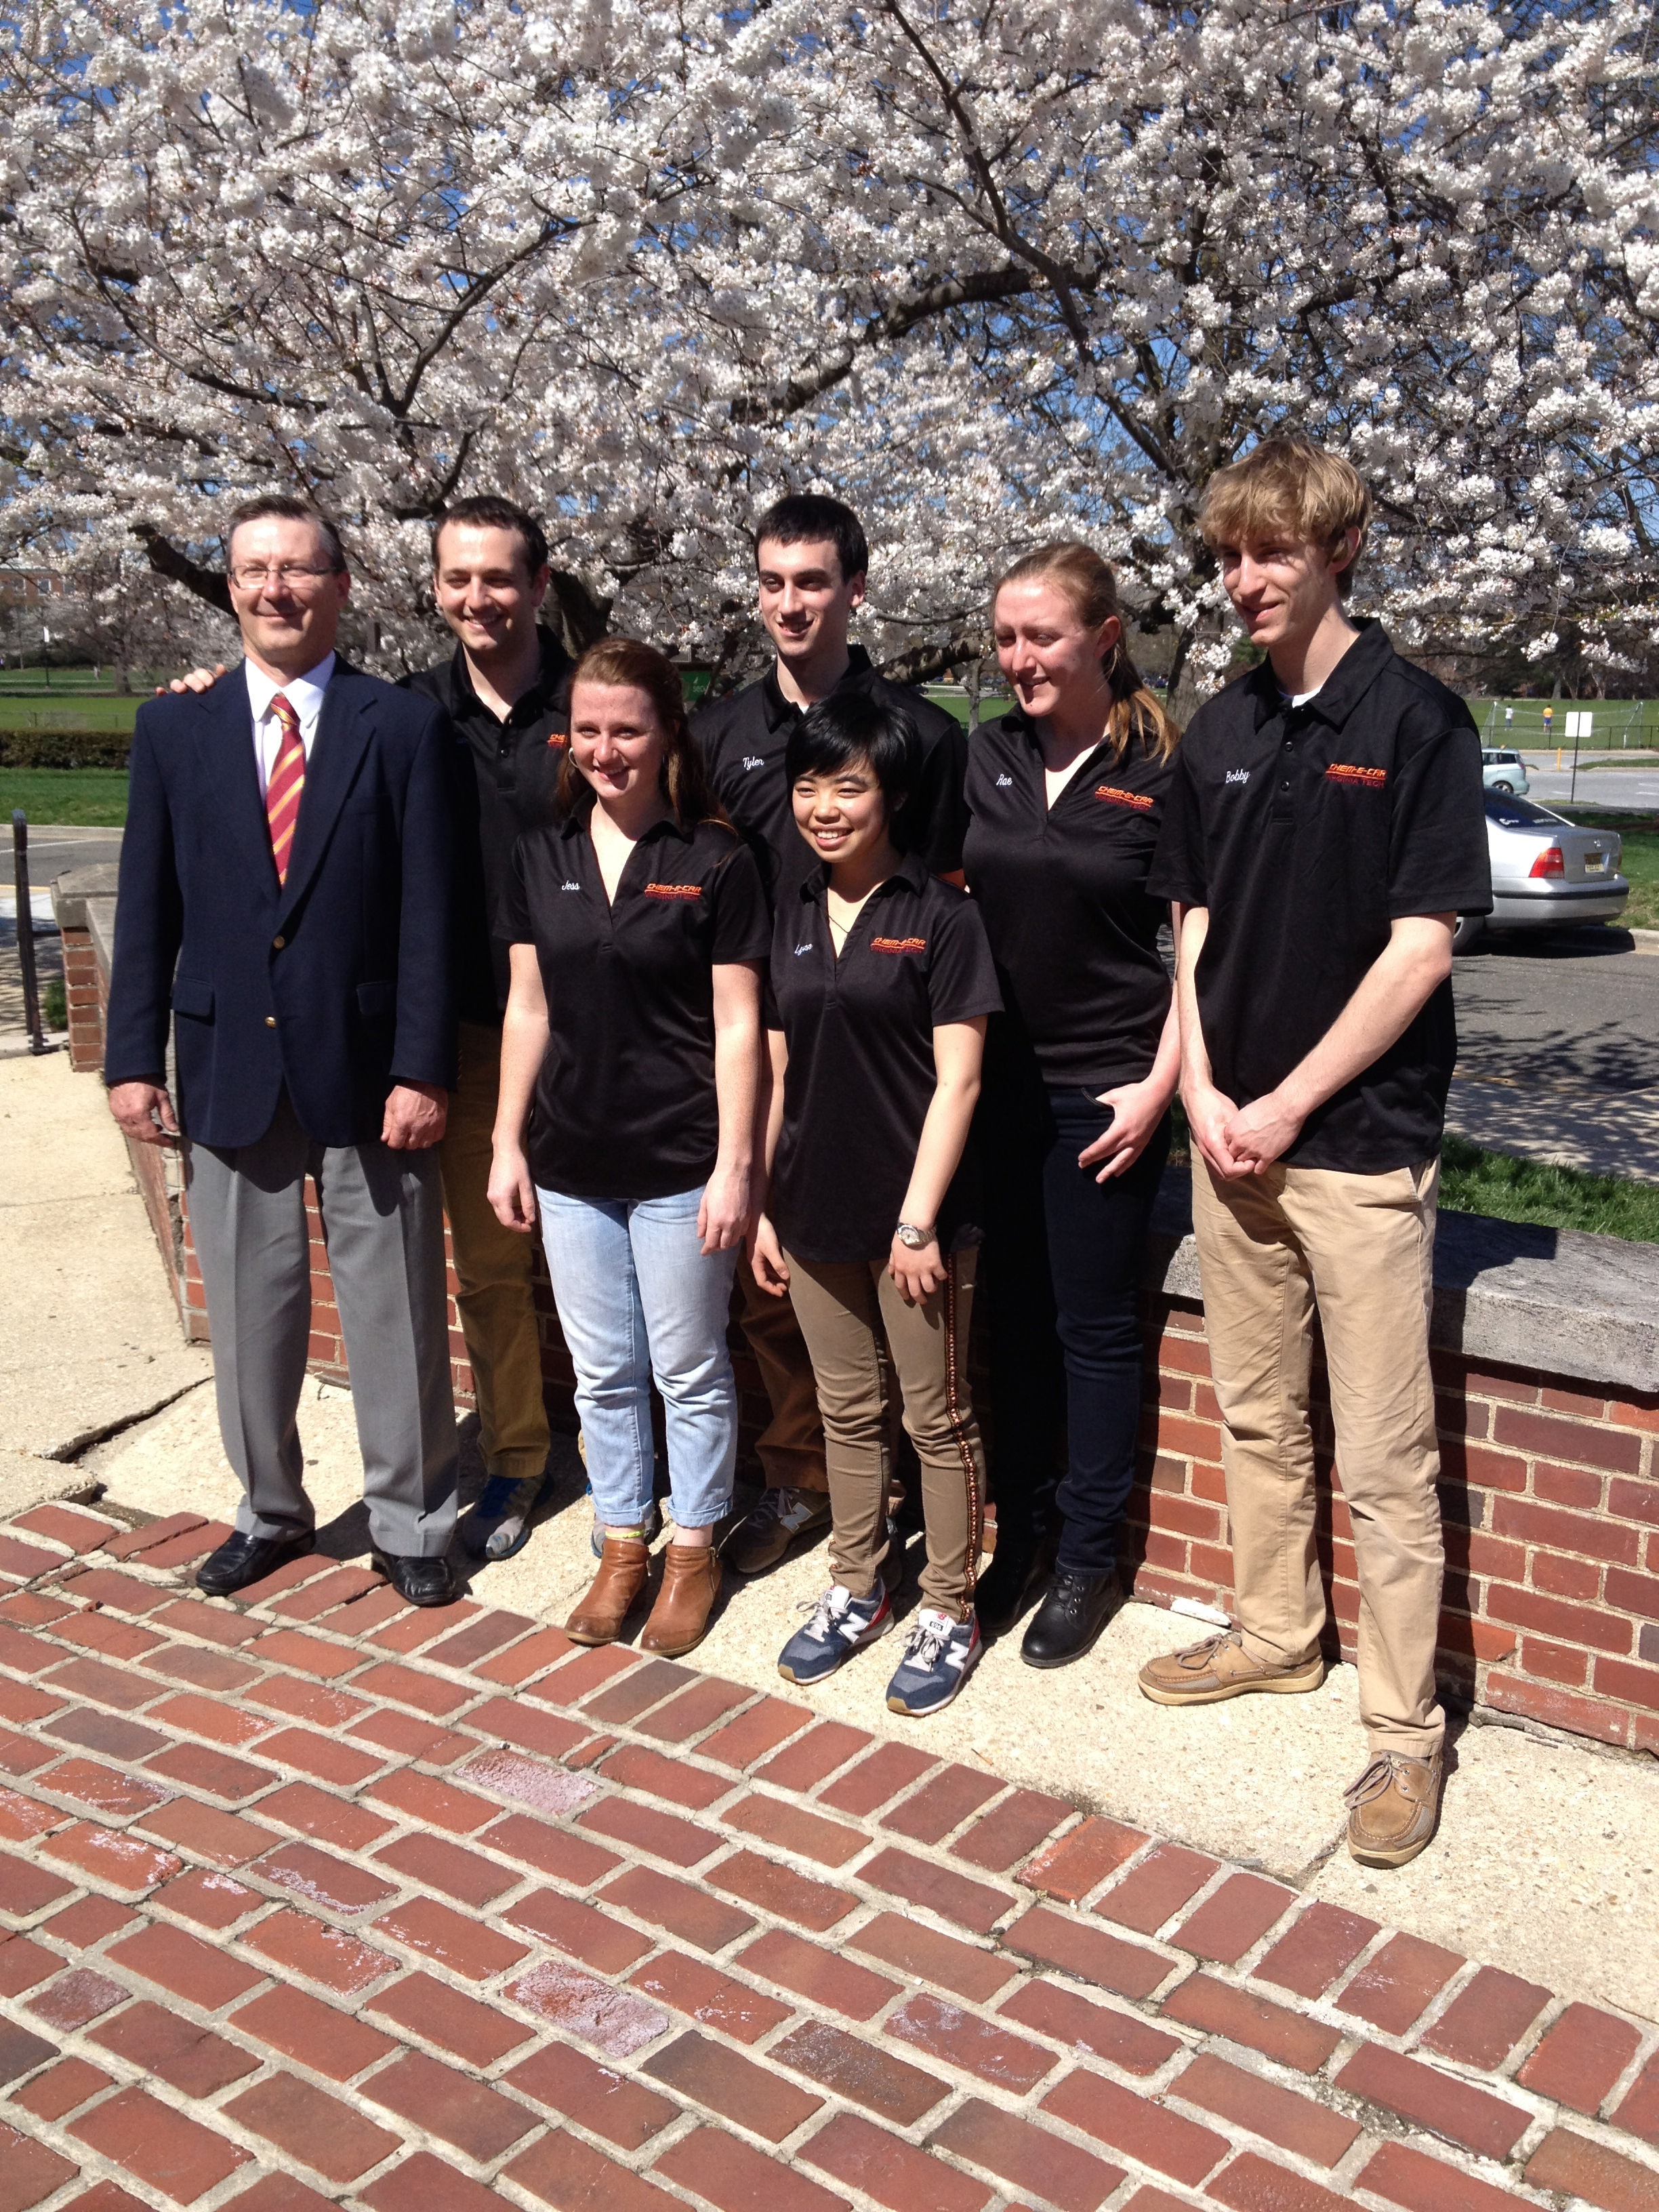 From left: Peter Rim, Coogan Thompson, Jessica Kersey, Tyler Reif, Yining Hao, Rachel Crews, and Bobby Hollingsworth.